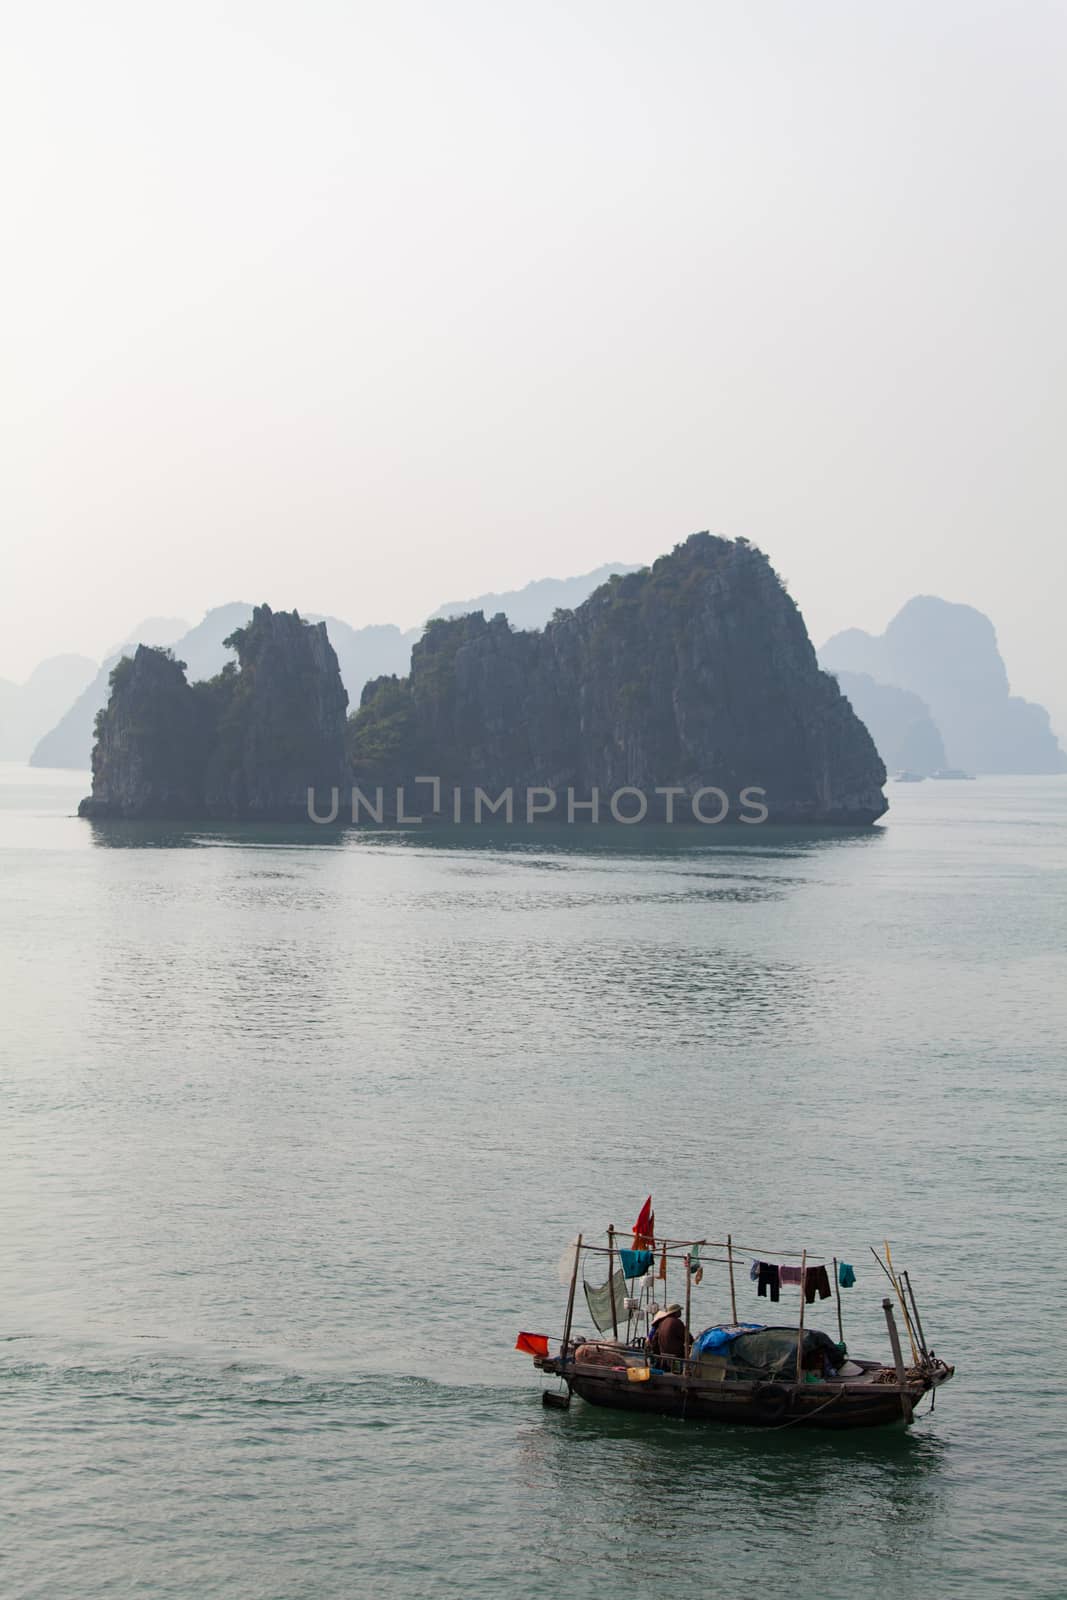 Ha Long Bay, Vietnam, is a World Heritage Site and very popular with tourists. Thousands of towering limestone islands topped by rainforests rising up out of the emerald seas. Local fishing boats. Cruise ships take tourists for day trips and overnight stays in the bay. , . High quality photo